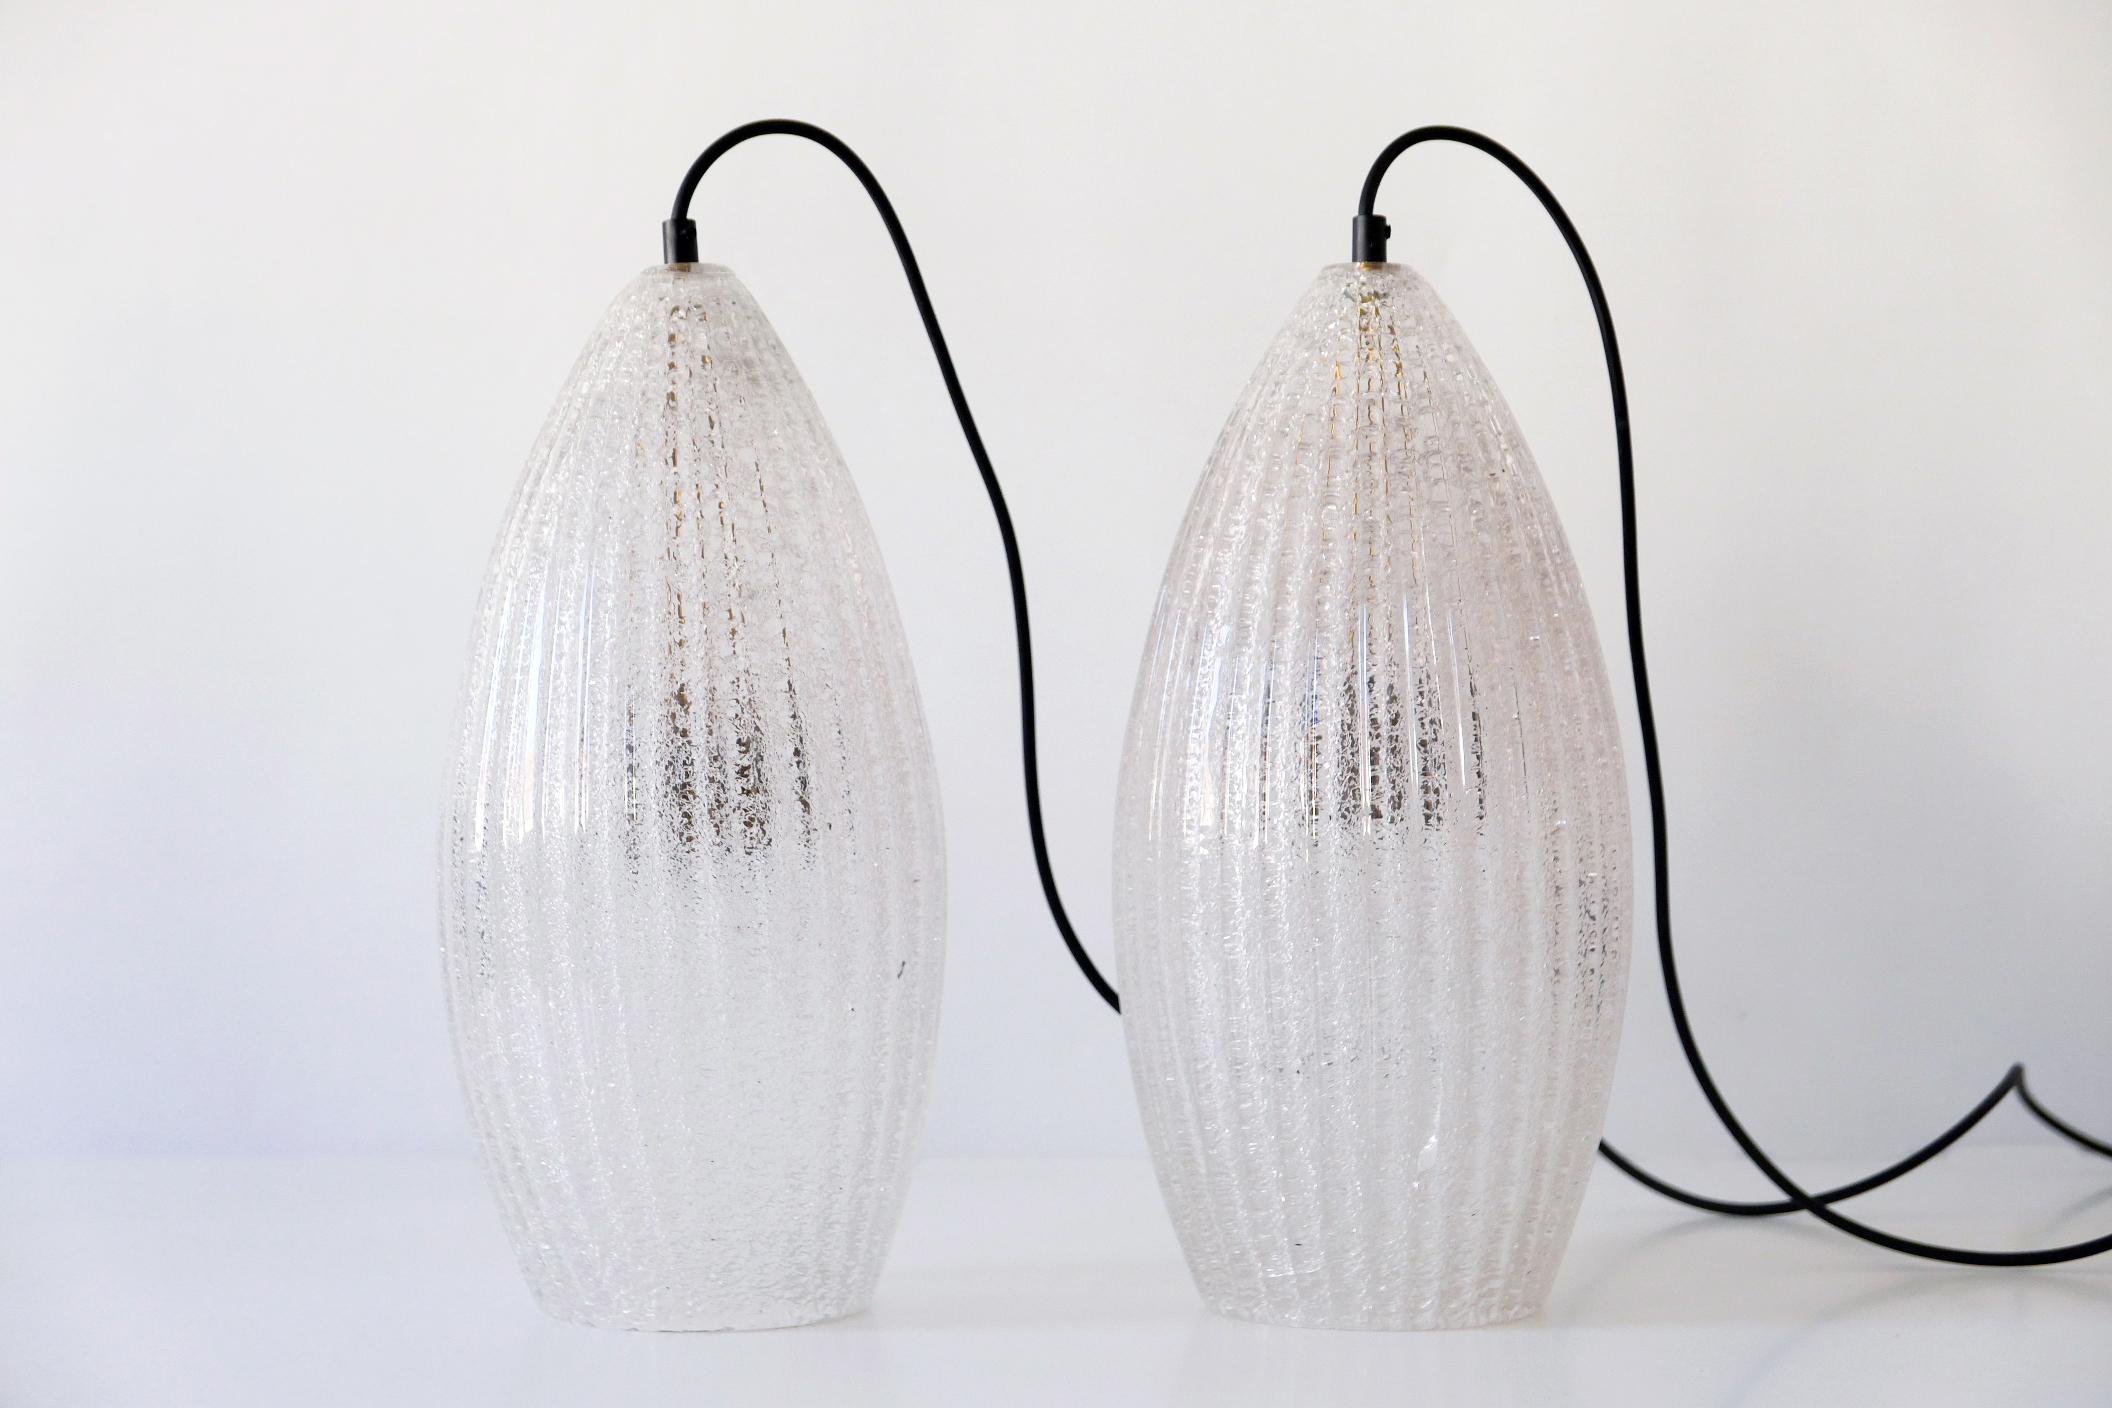 Set of Two Mid-Century Modern Textured Glass Pendant Lamps, 1960s, Germany For Sale 12